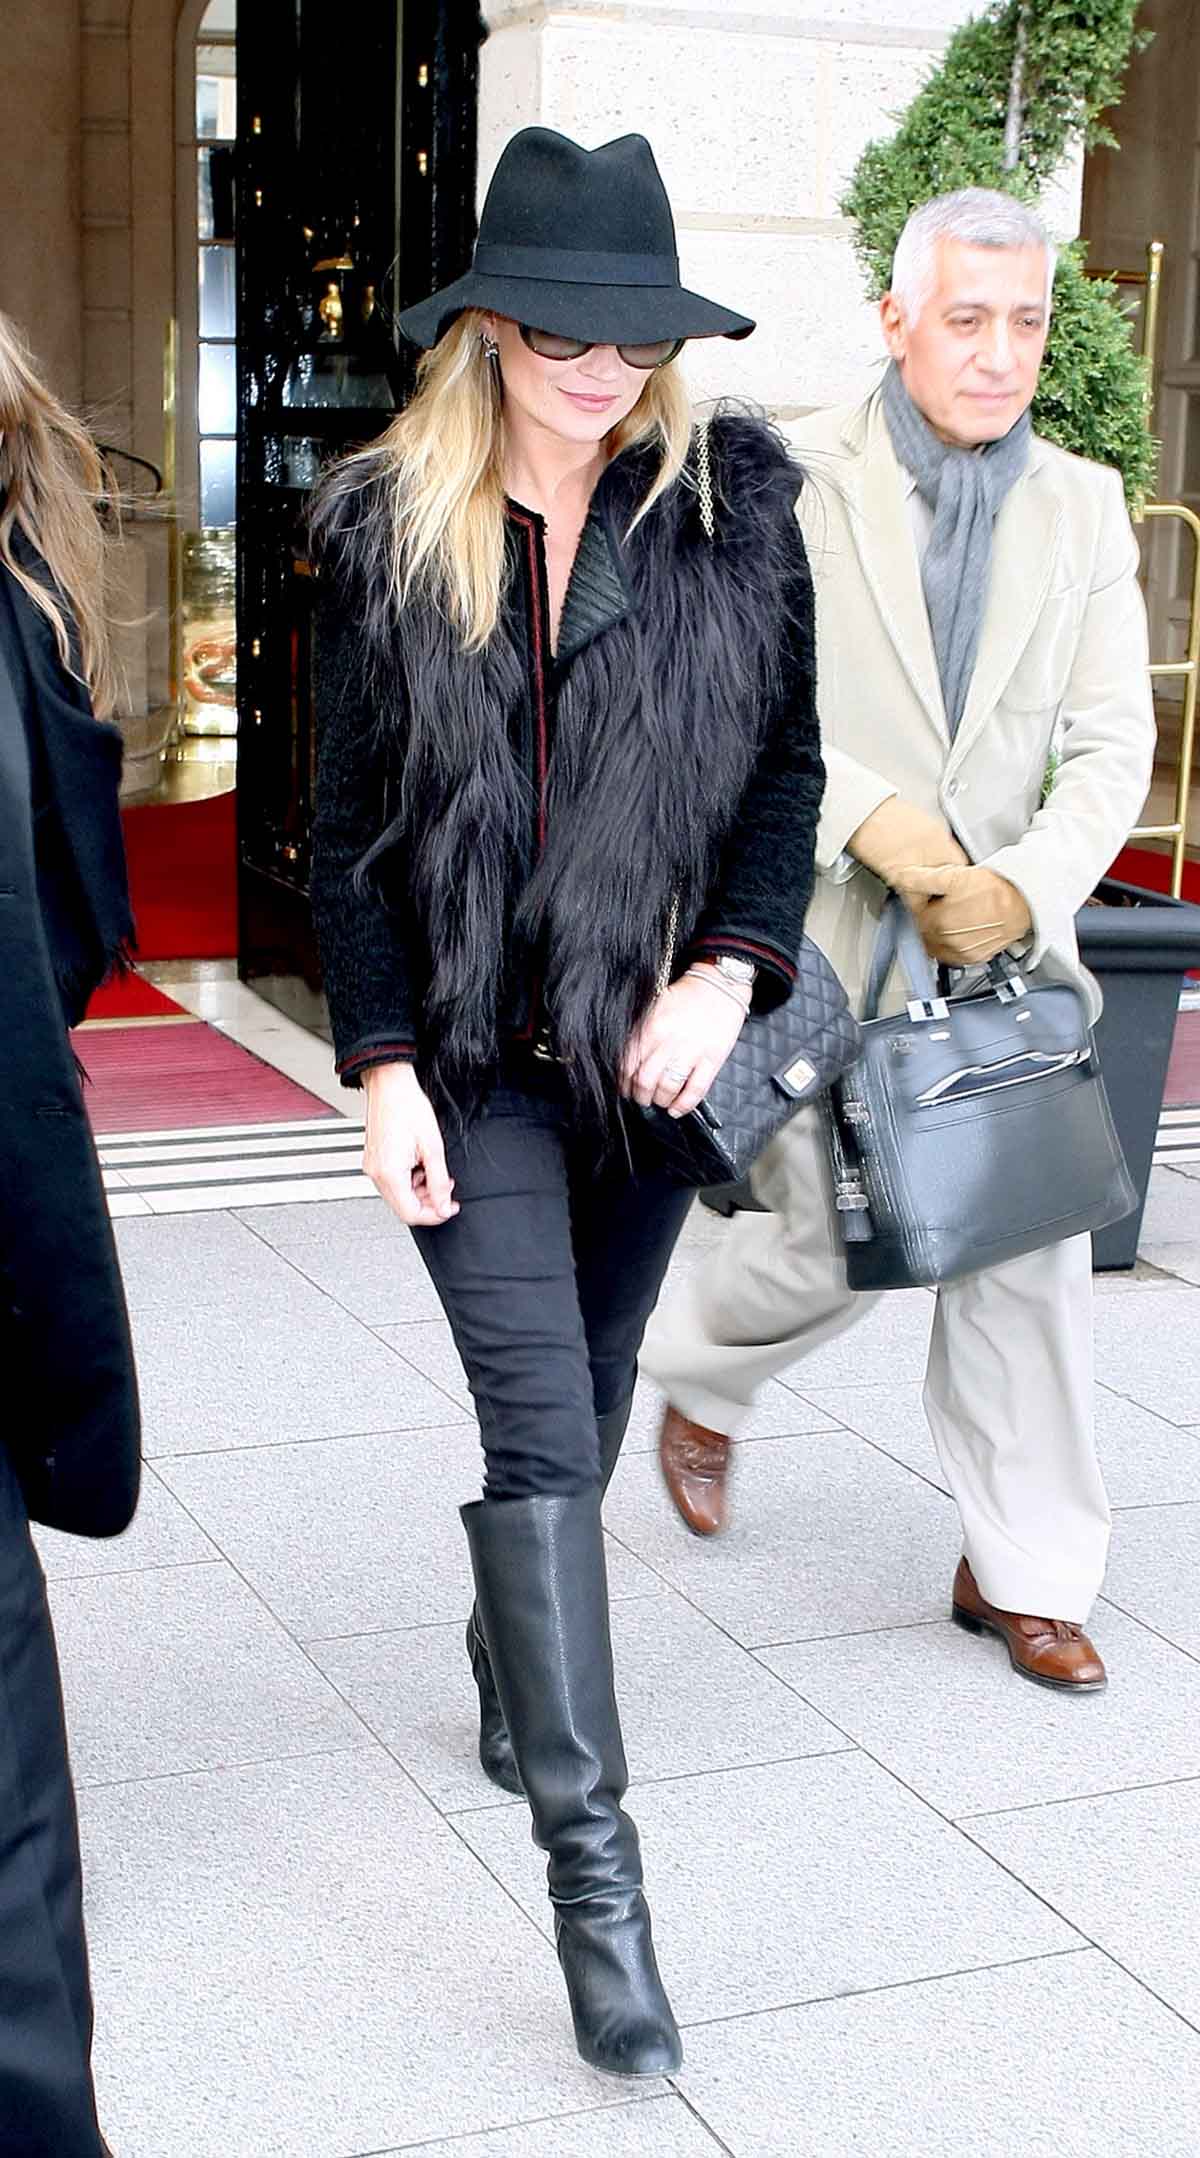 Kate Moss leaving her hotel and she going to the "Lipp" restaurant in Paris.